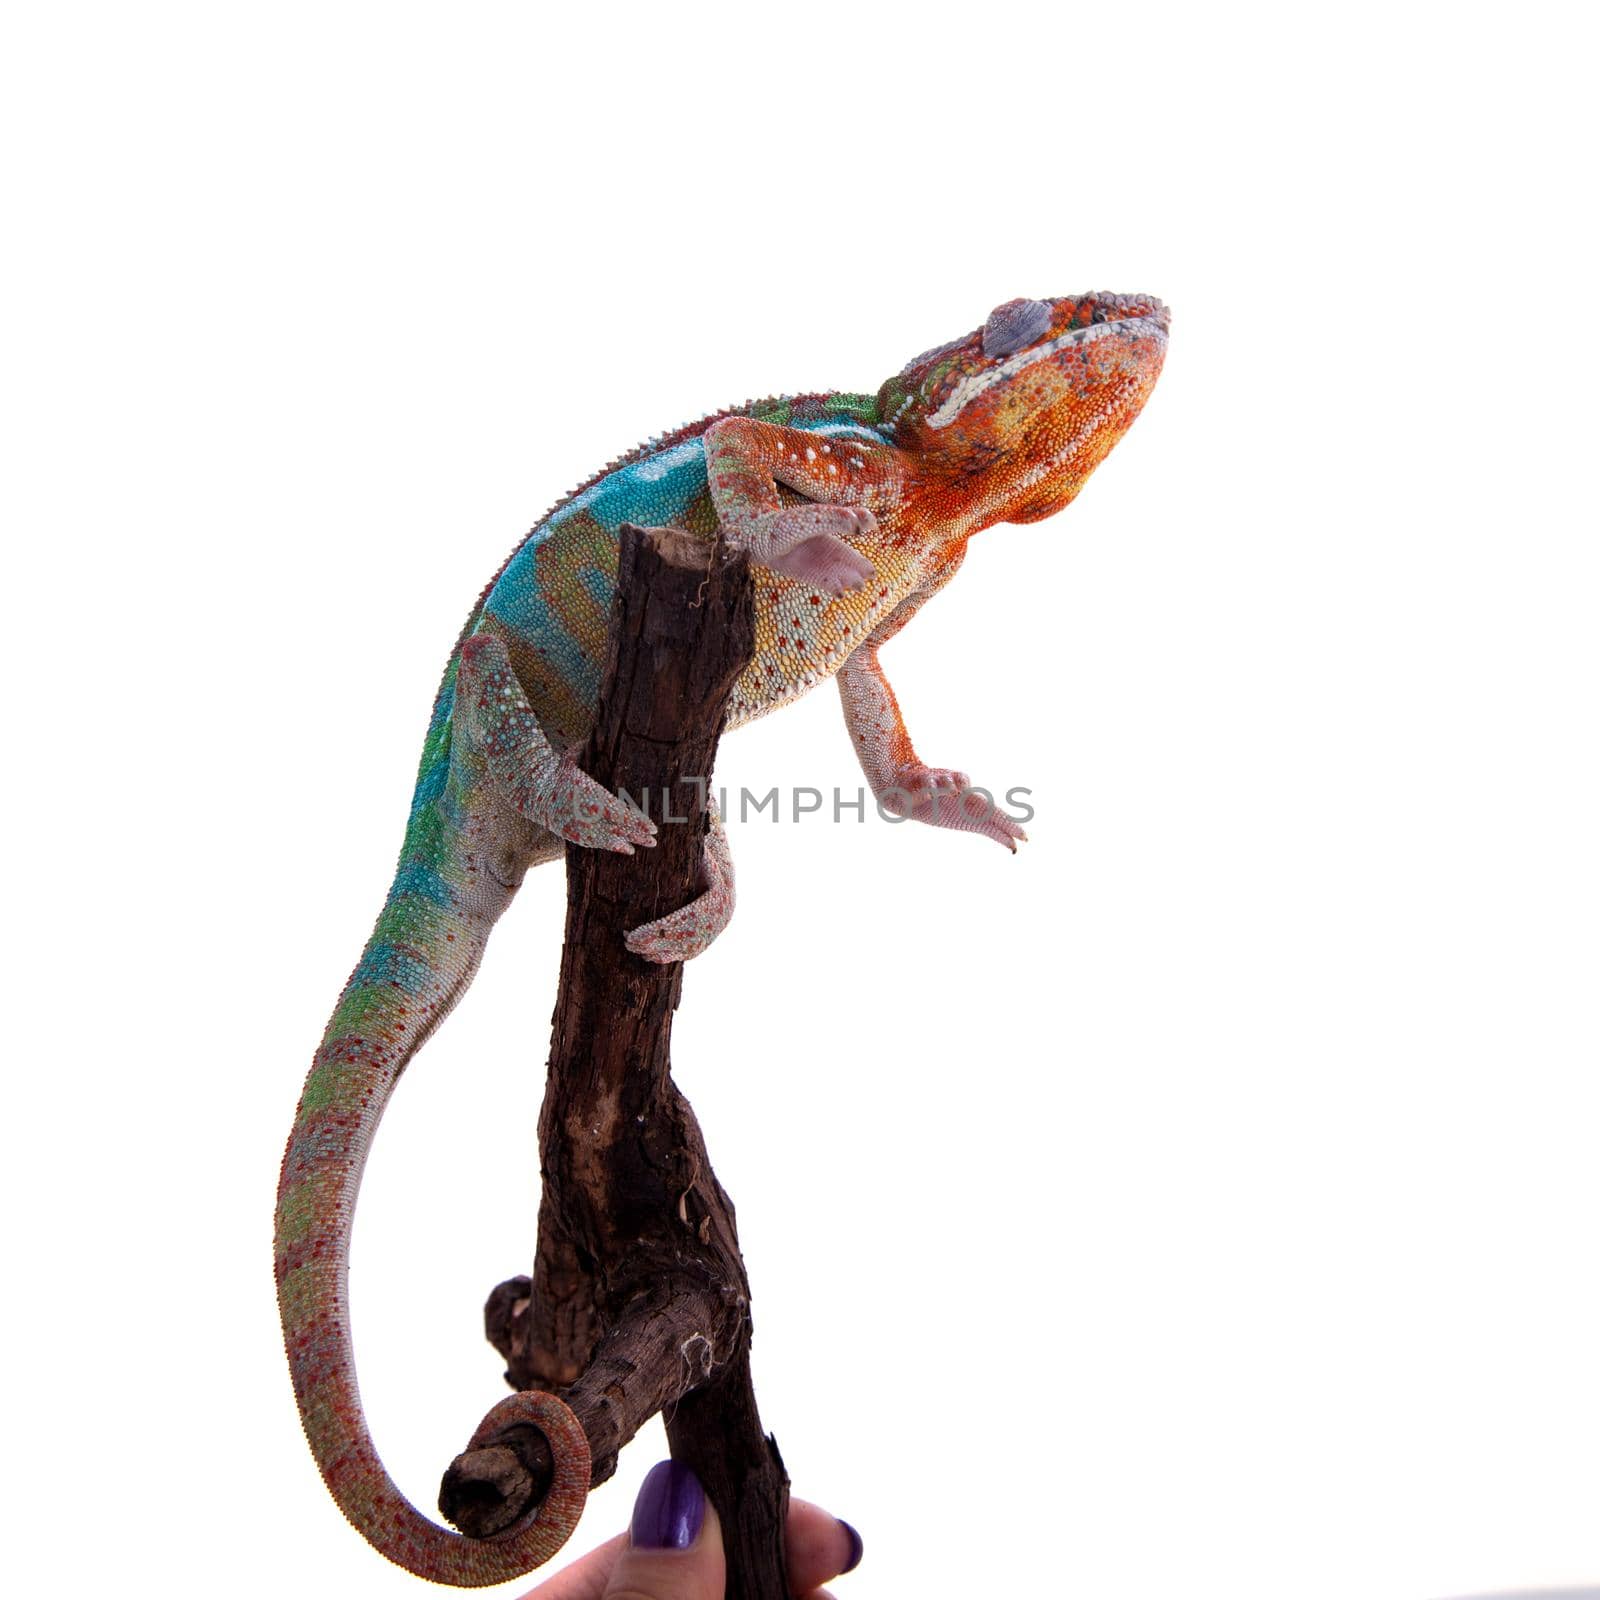 The panther chameleon, Furcifer pardalis isolated on white background